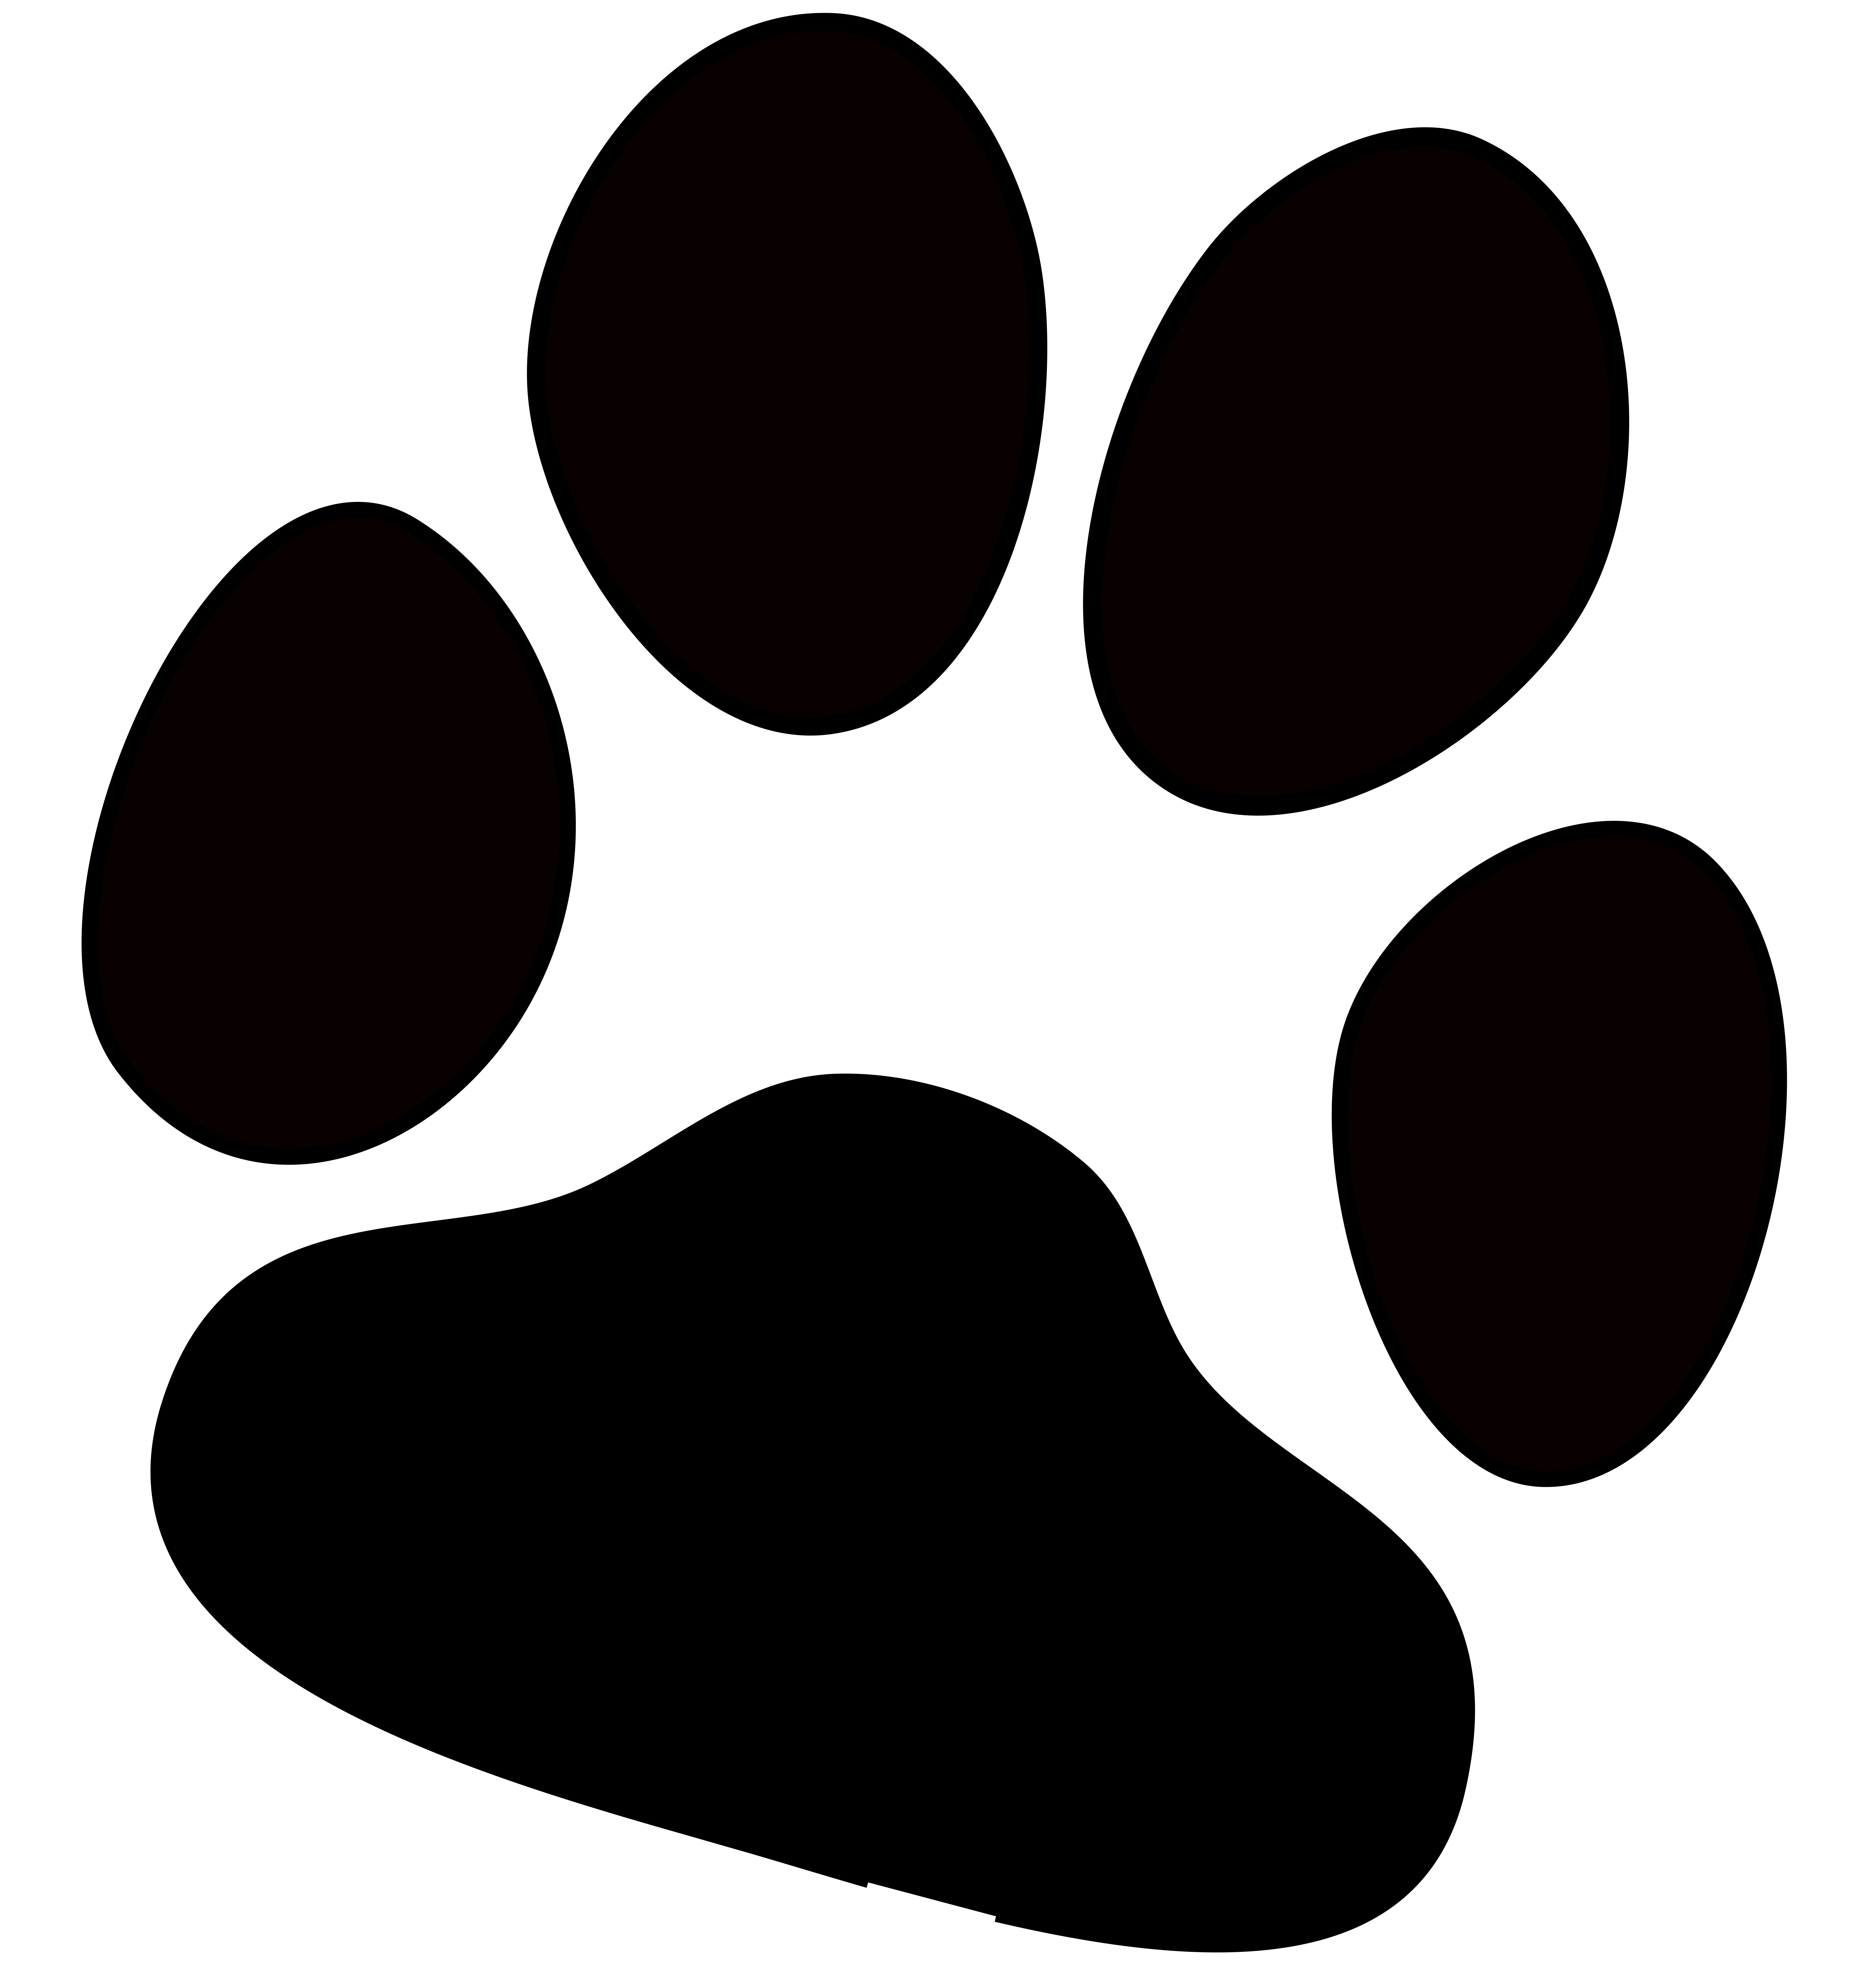 Paw Print PNG HD Transparent Paw Print HD.PNG Images. | PlusPNG